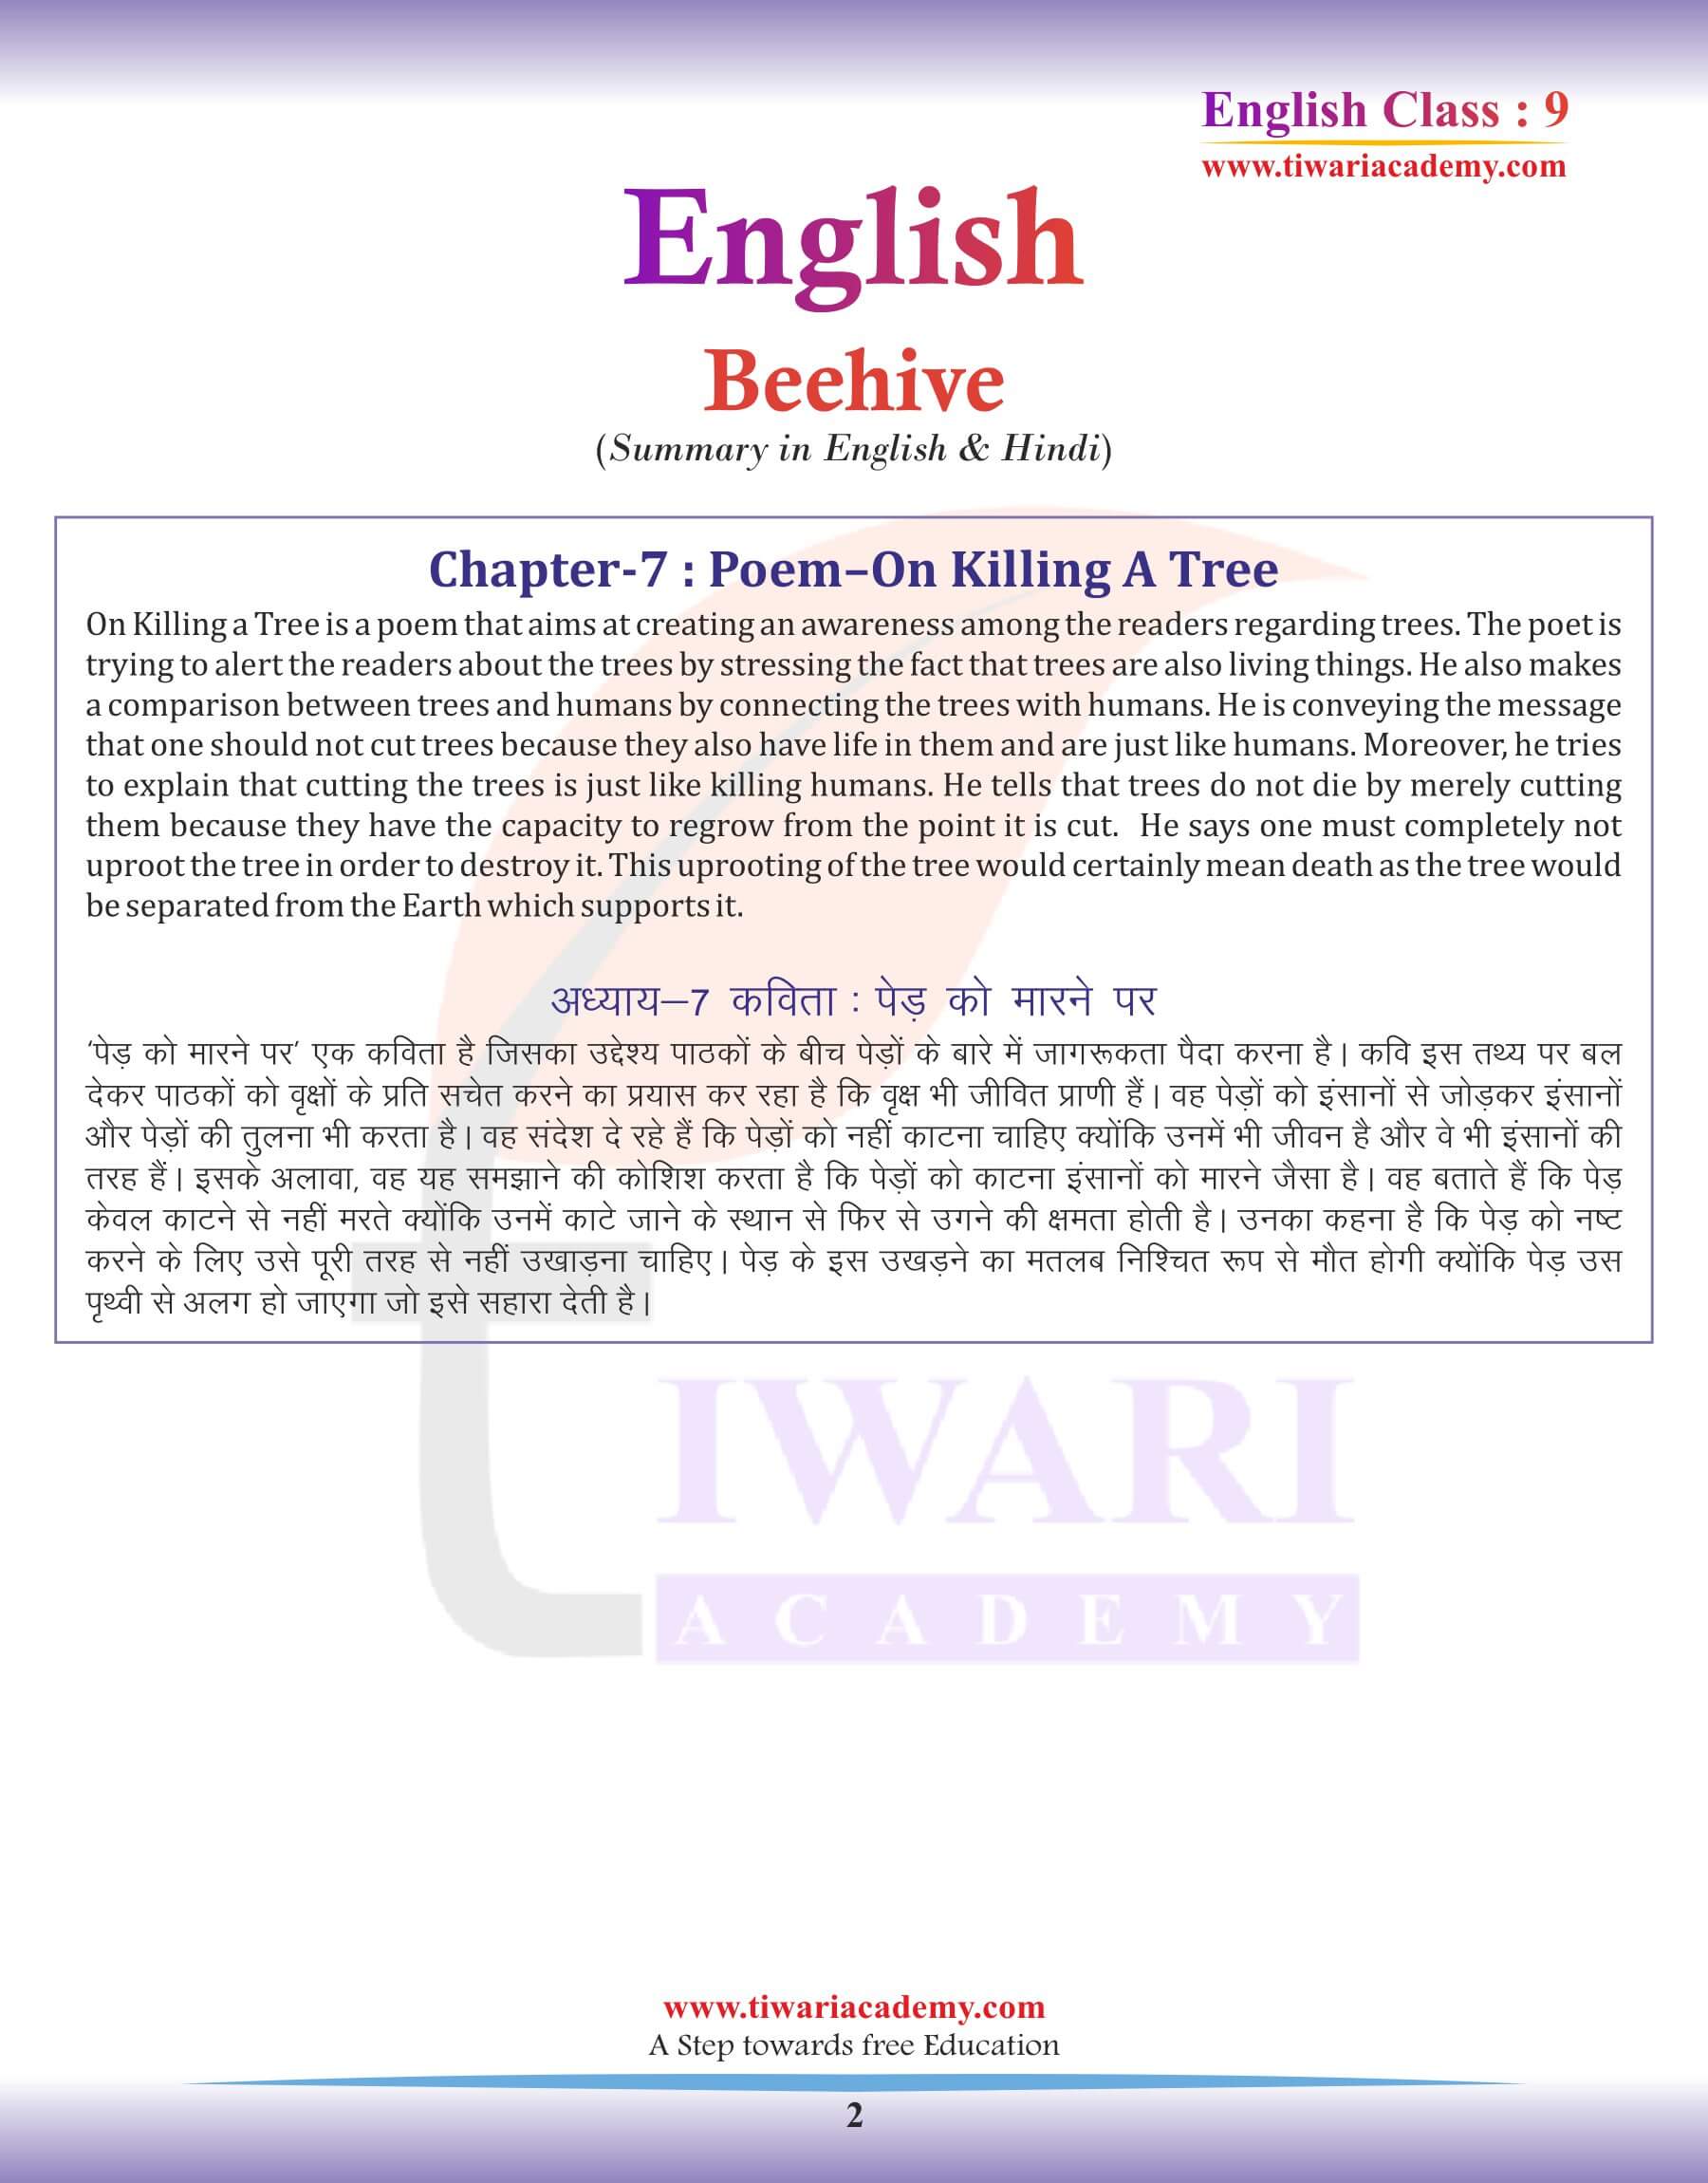 Class 9 English Beehive Chapter 7 Summary of poem